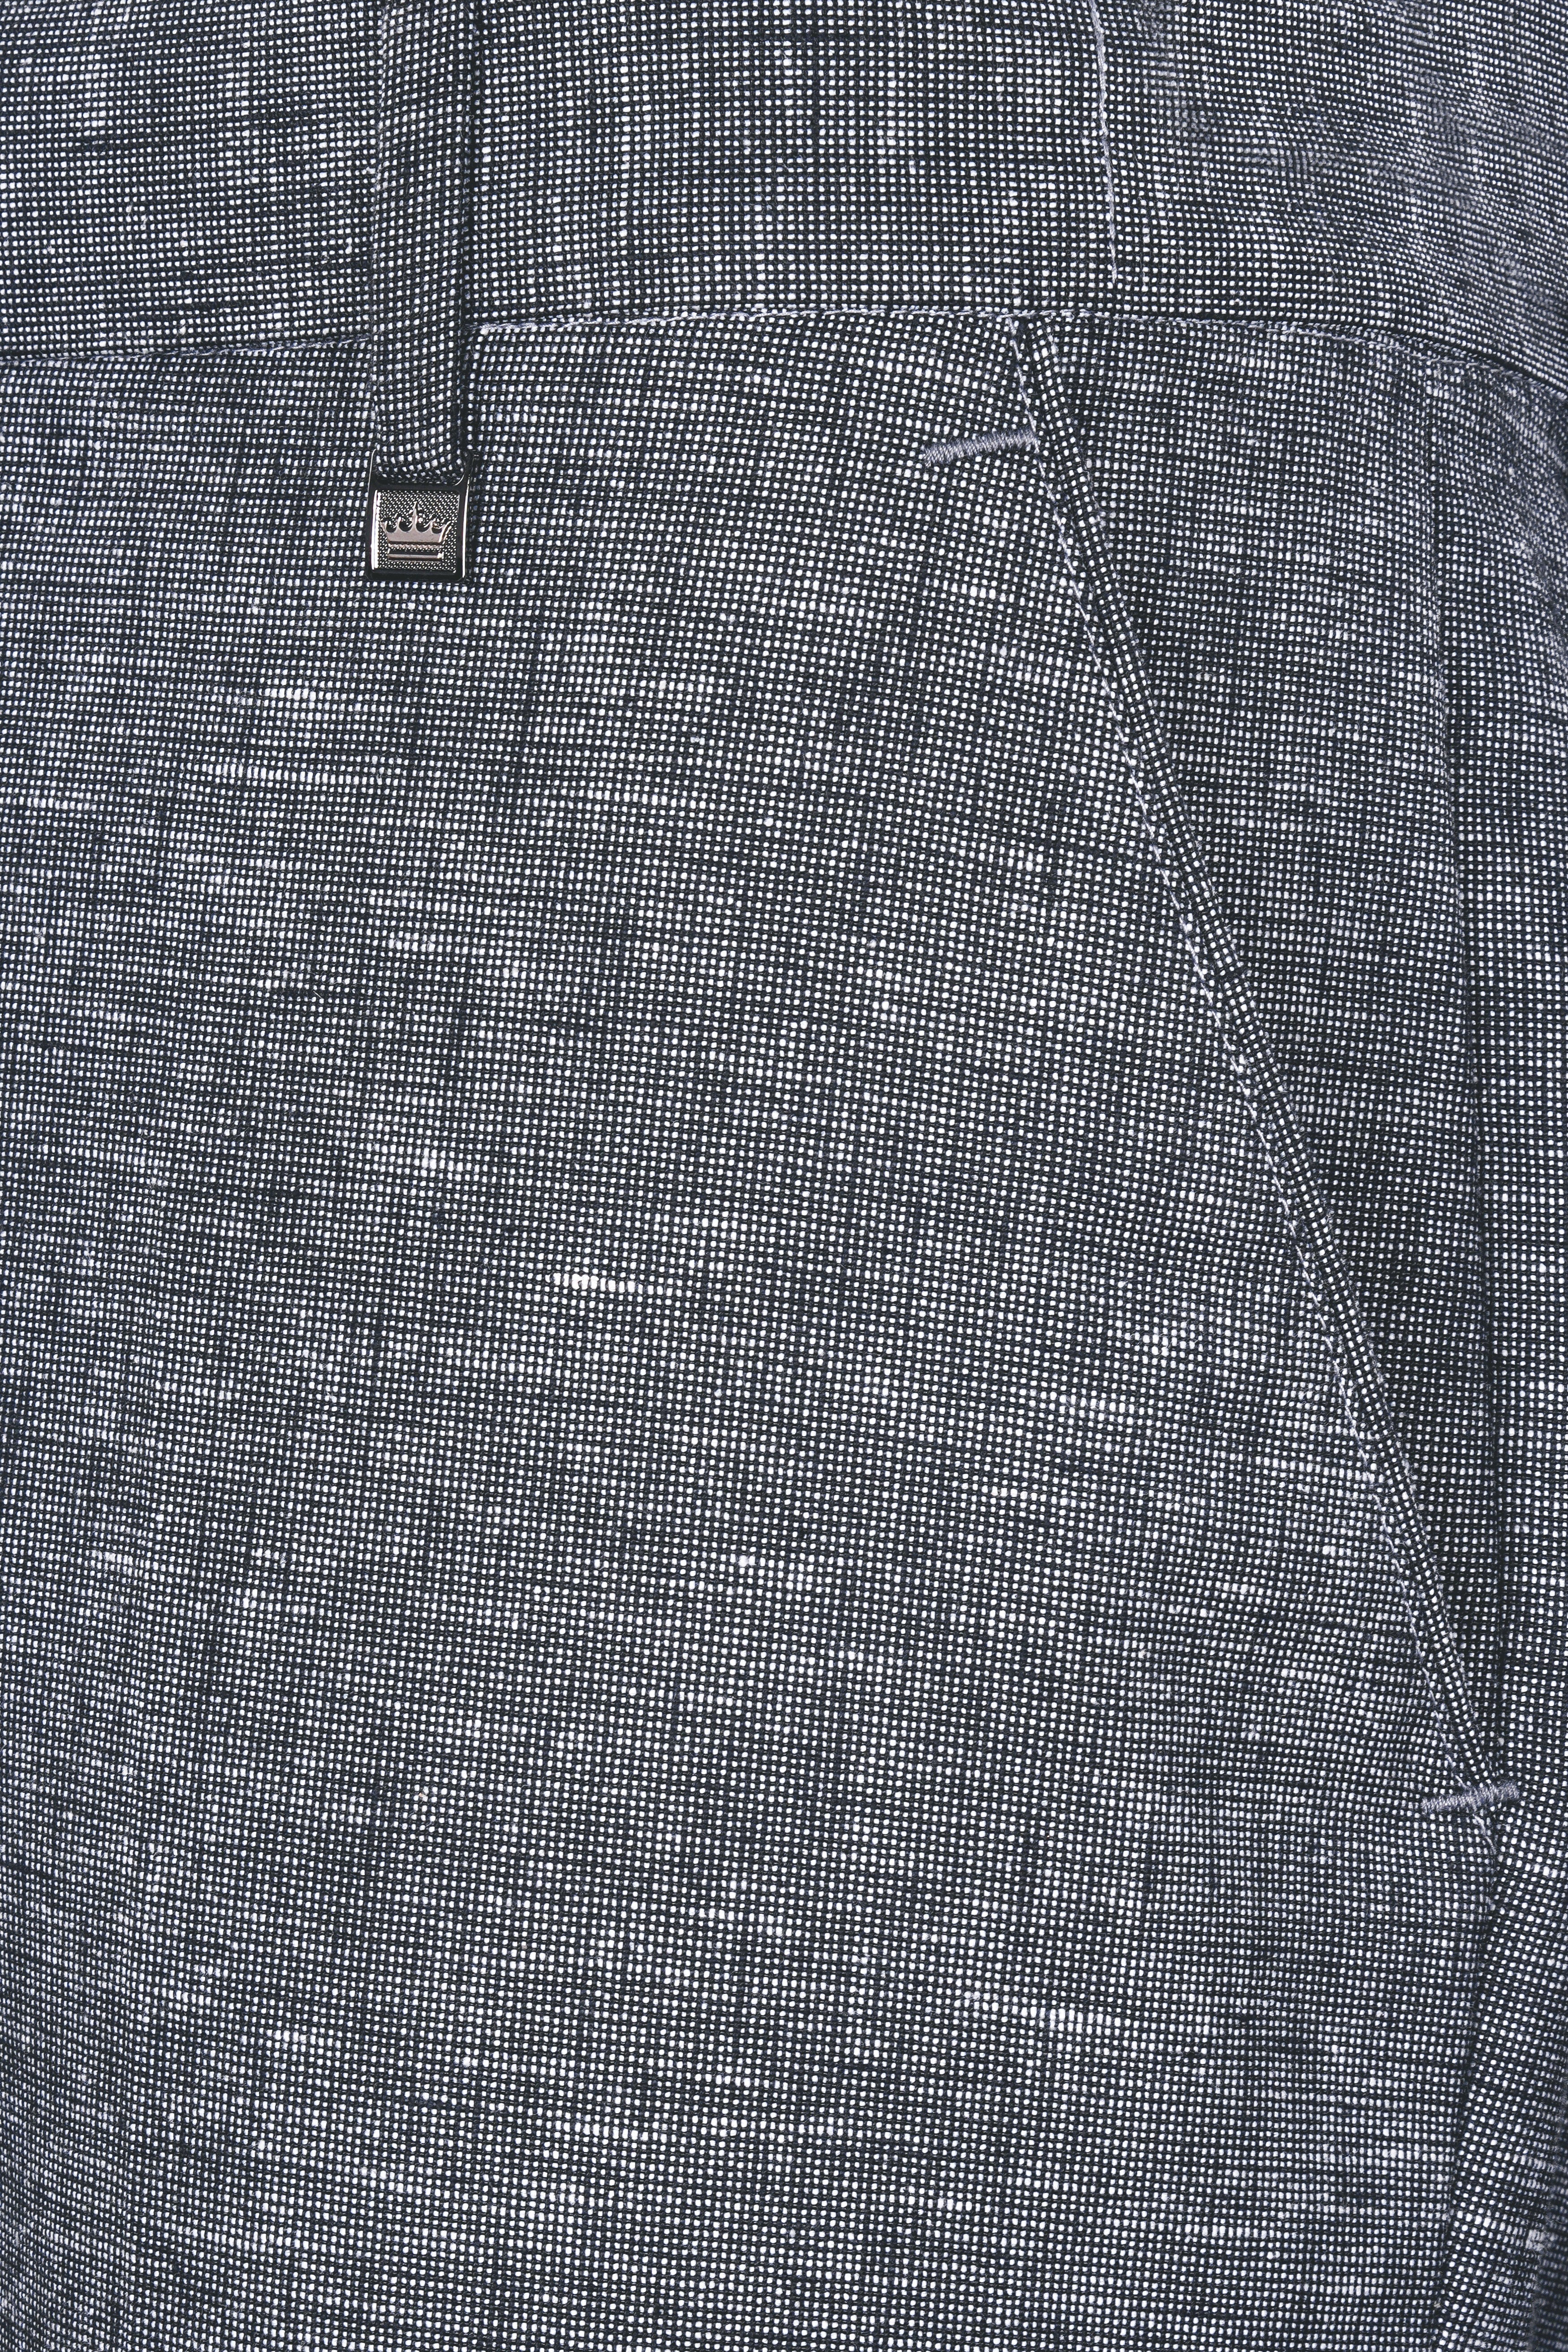 Cloudy Gray Luxurious Linen Bandhgala Suit ST2955-BG-36,ST2955-BG-38,ST2955-BG-40,ST2955-BG-42,ST2955-BG-44,ST2955-BG-46,ST2955-BG-48,ST2955-BG-50,ST2955-BG-52,ST2955-BG-54,ST2955-BG-56,ST2955-BG-58,ST2955-BG-60